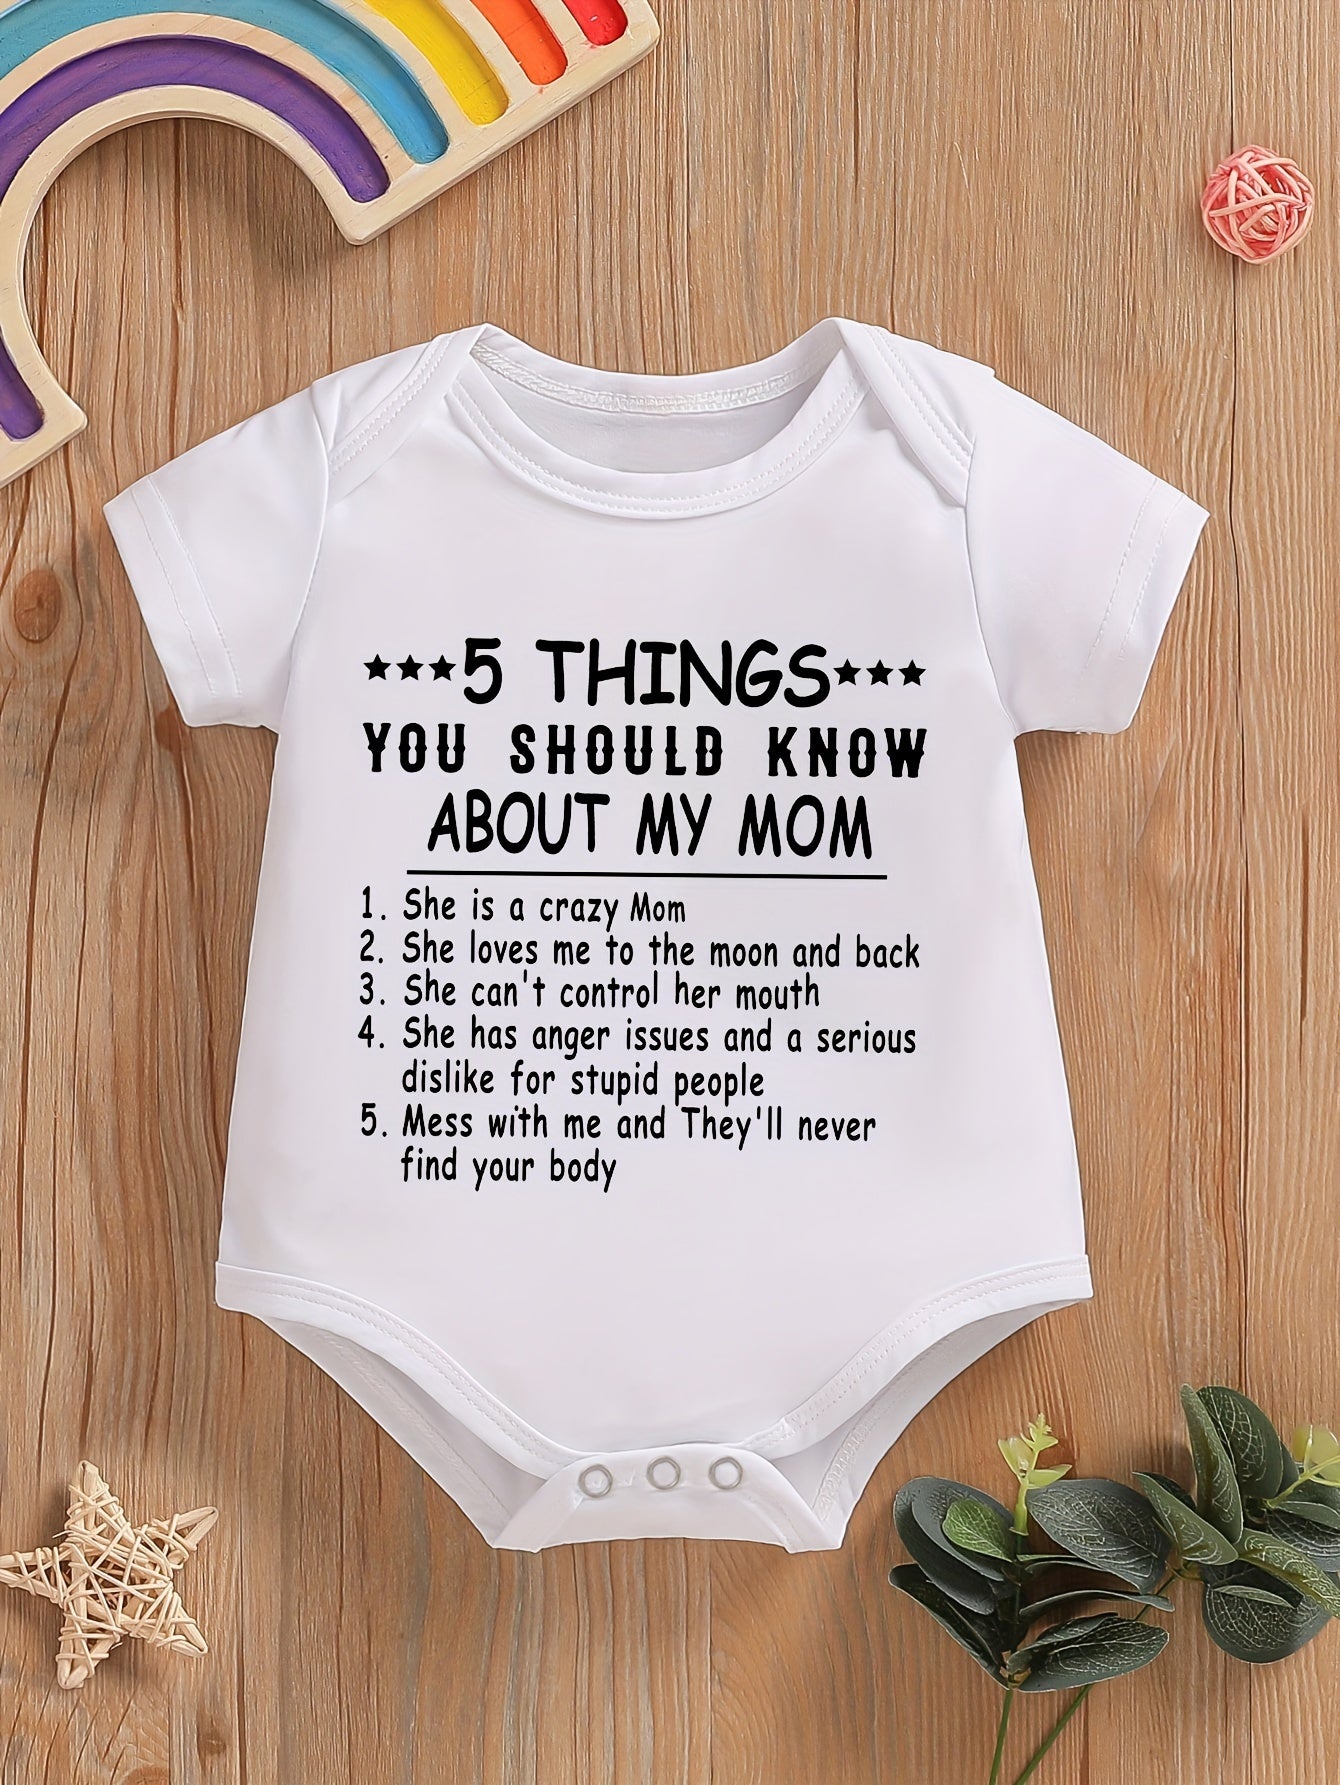 Baby Cute Letter Print Triangle Onesie - 5 Things You Should Know About My Mom Print Newborn Short-sleeved Romper Pajamas